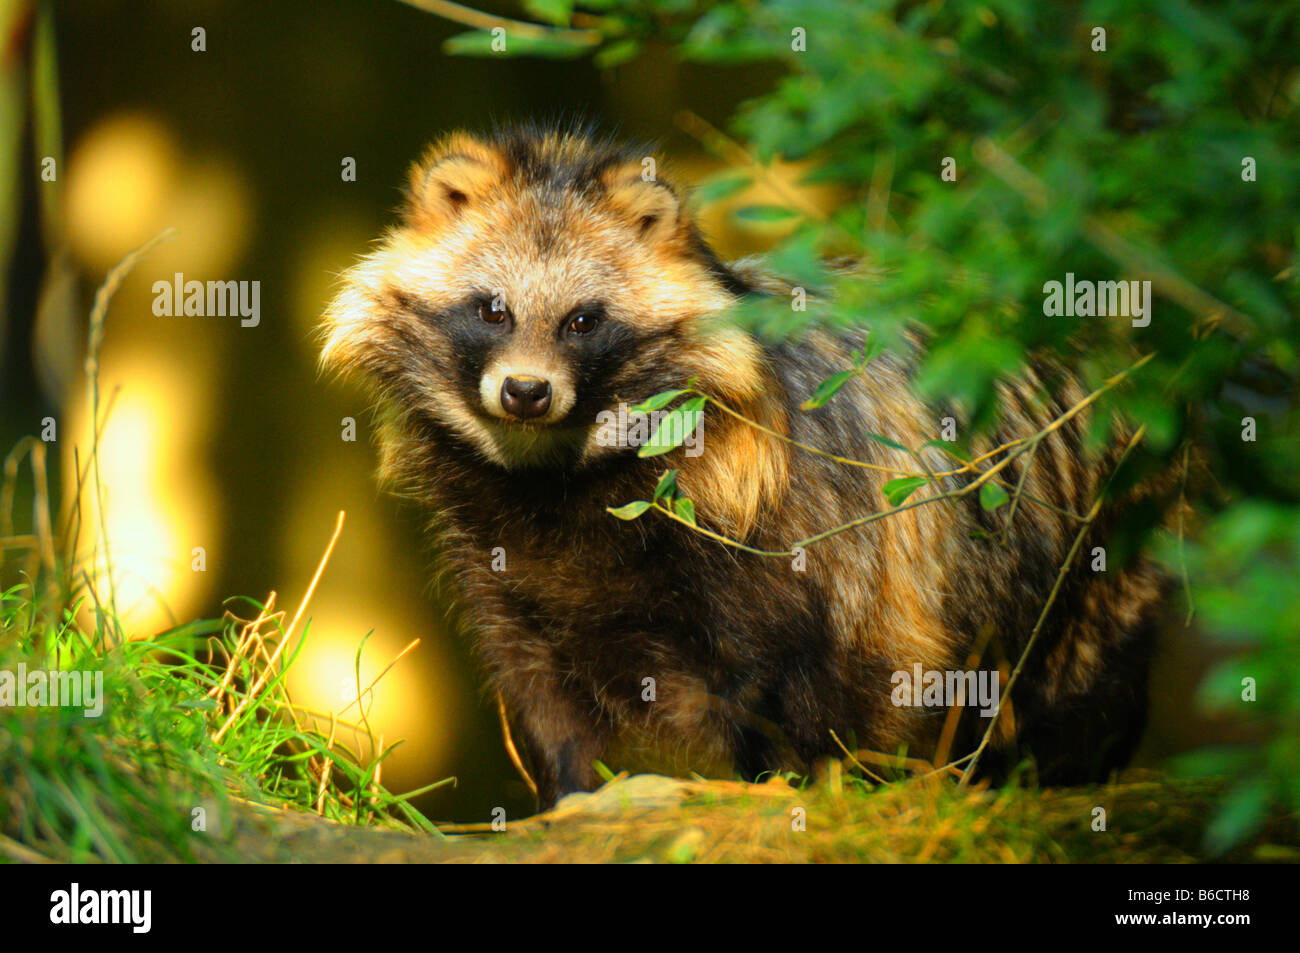 Raccoon (Procyon lotor) standing in forest Stock Photo